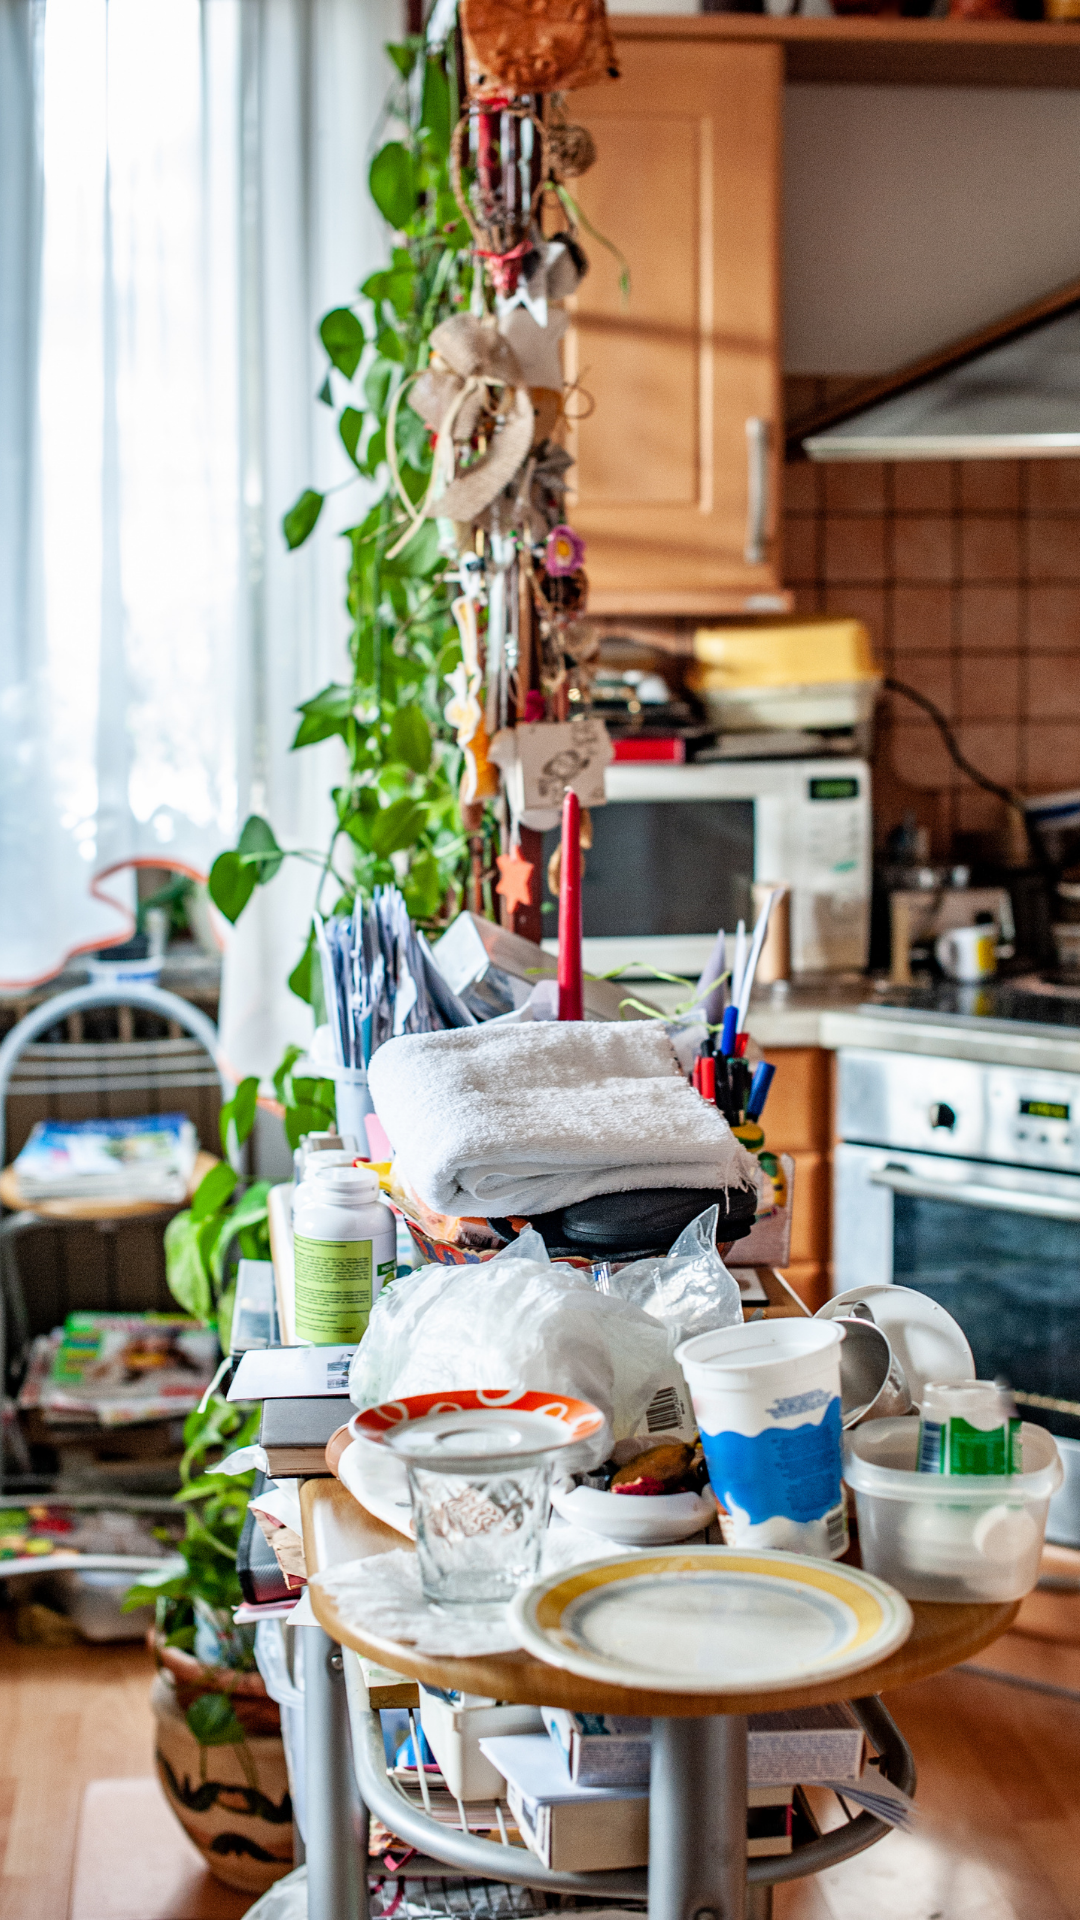 Are You a Hoarder 4 Warning Signs to Watch out For